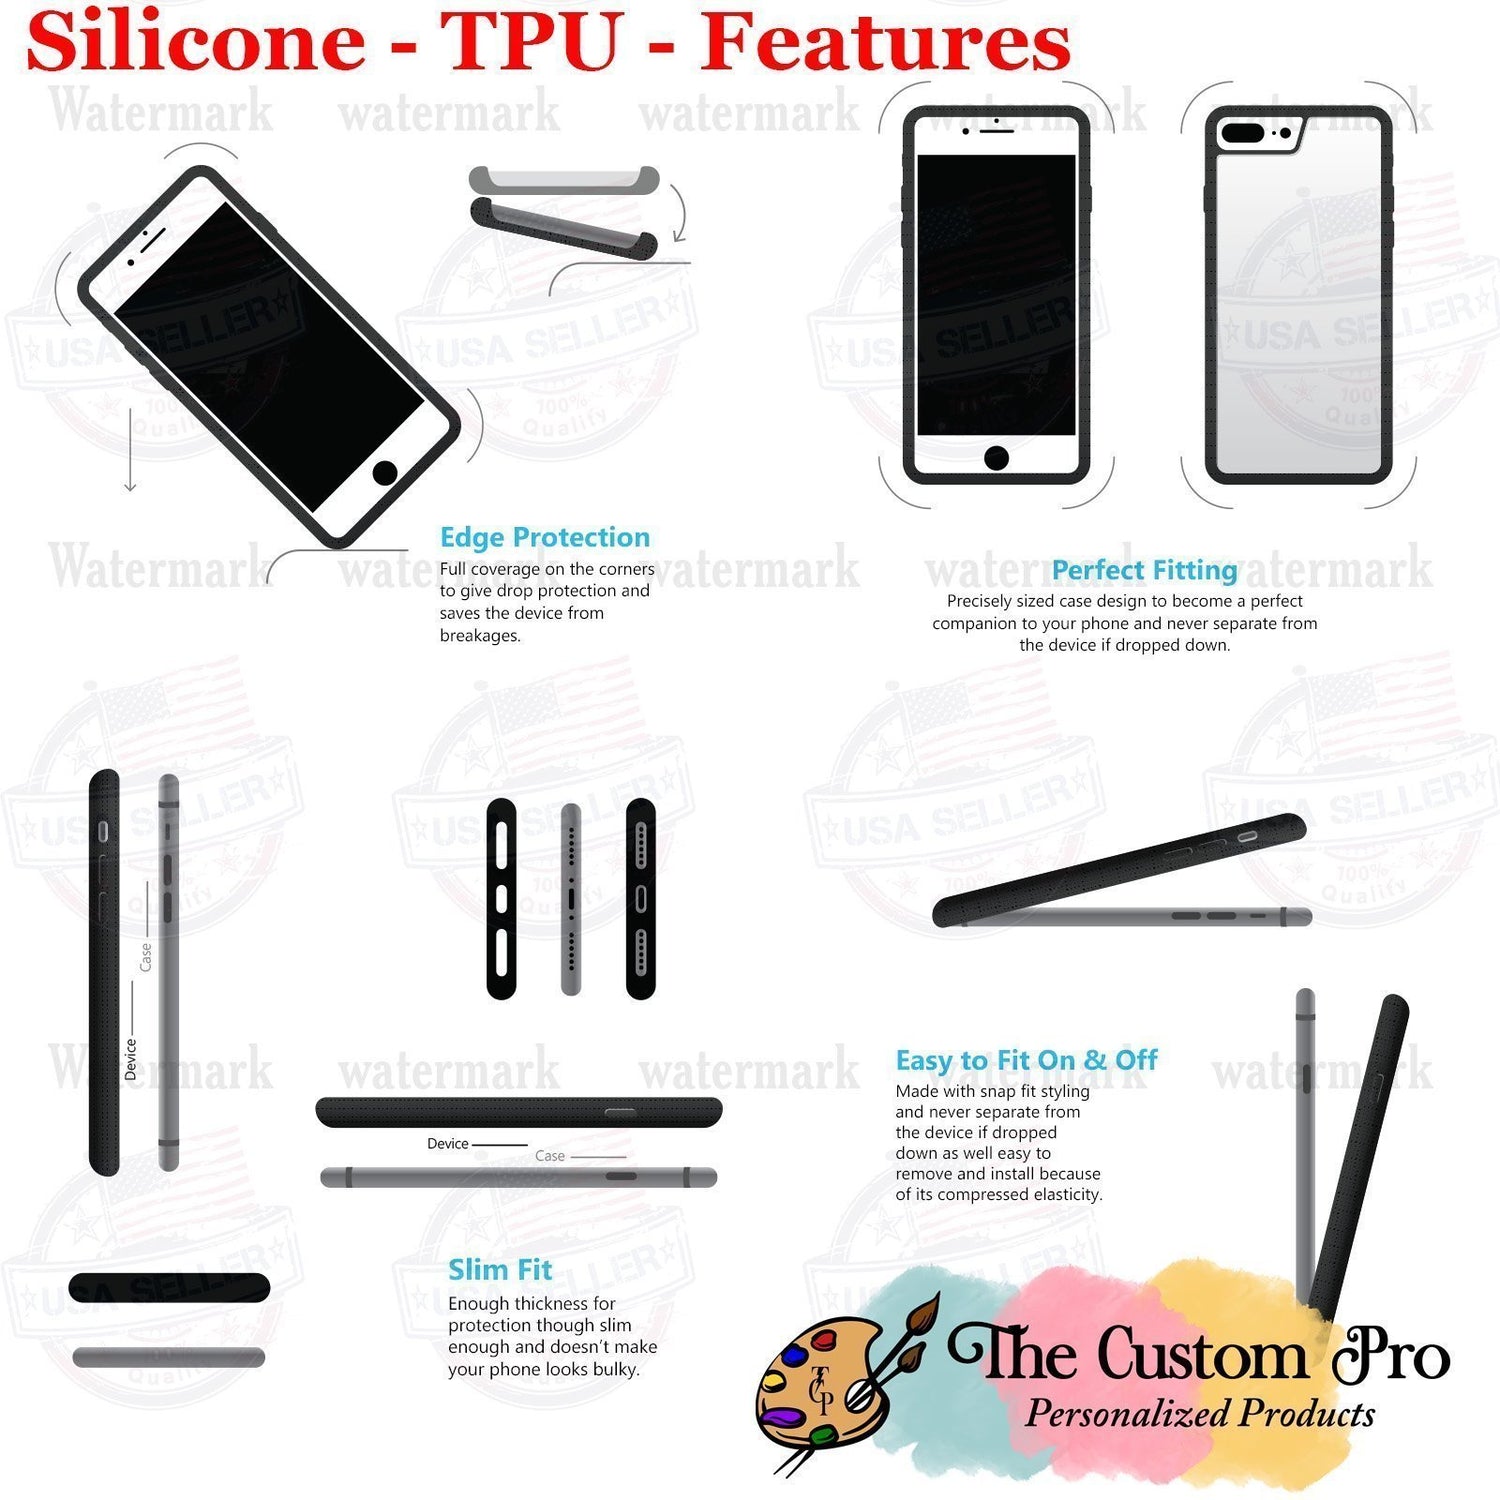 Silicone - TPU Phone Case Features